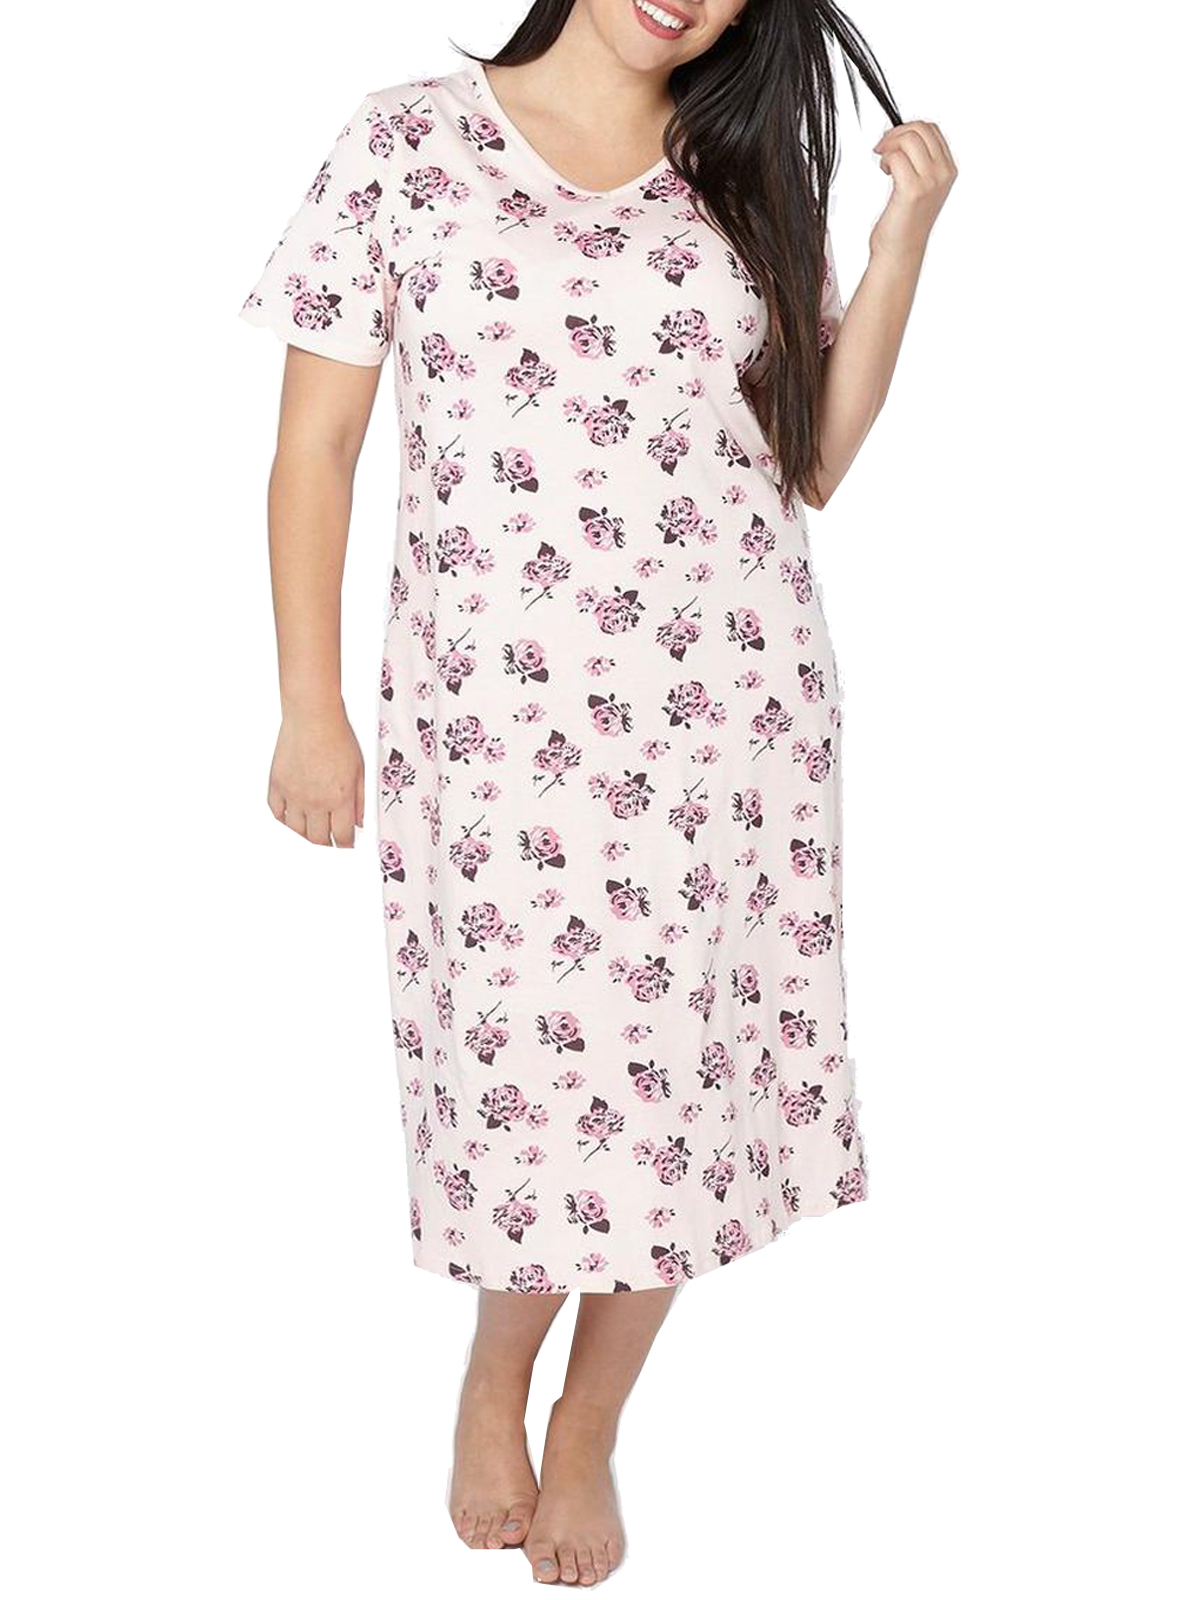 PINK Pure Cotton Rose Print Short Sleeve Nightdress - Plus Size 14/16 to 3